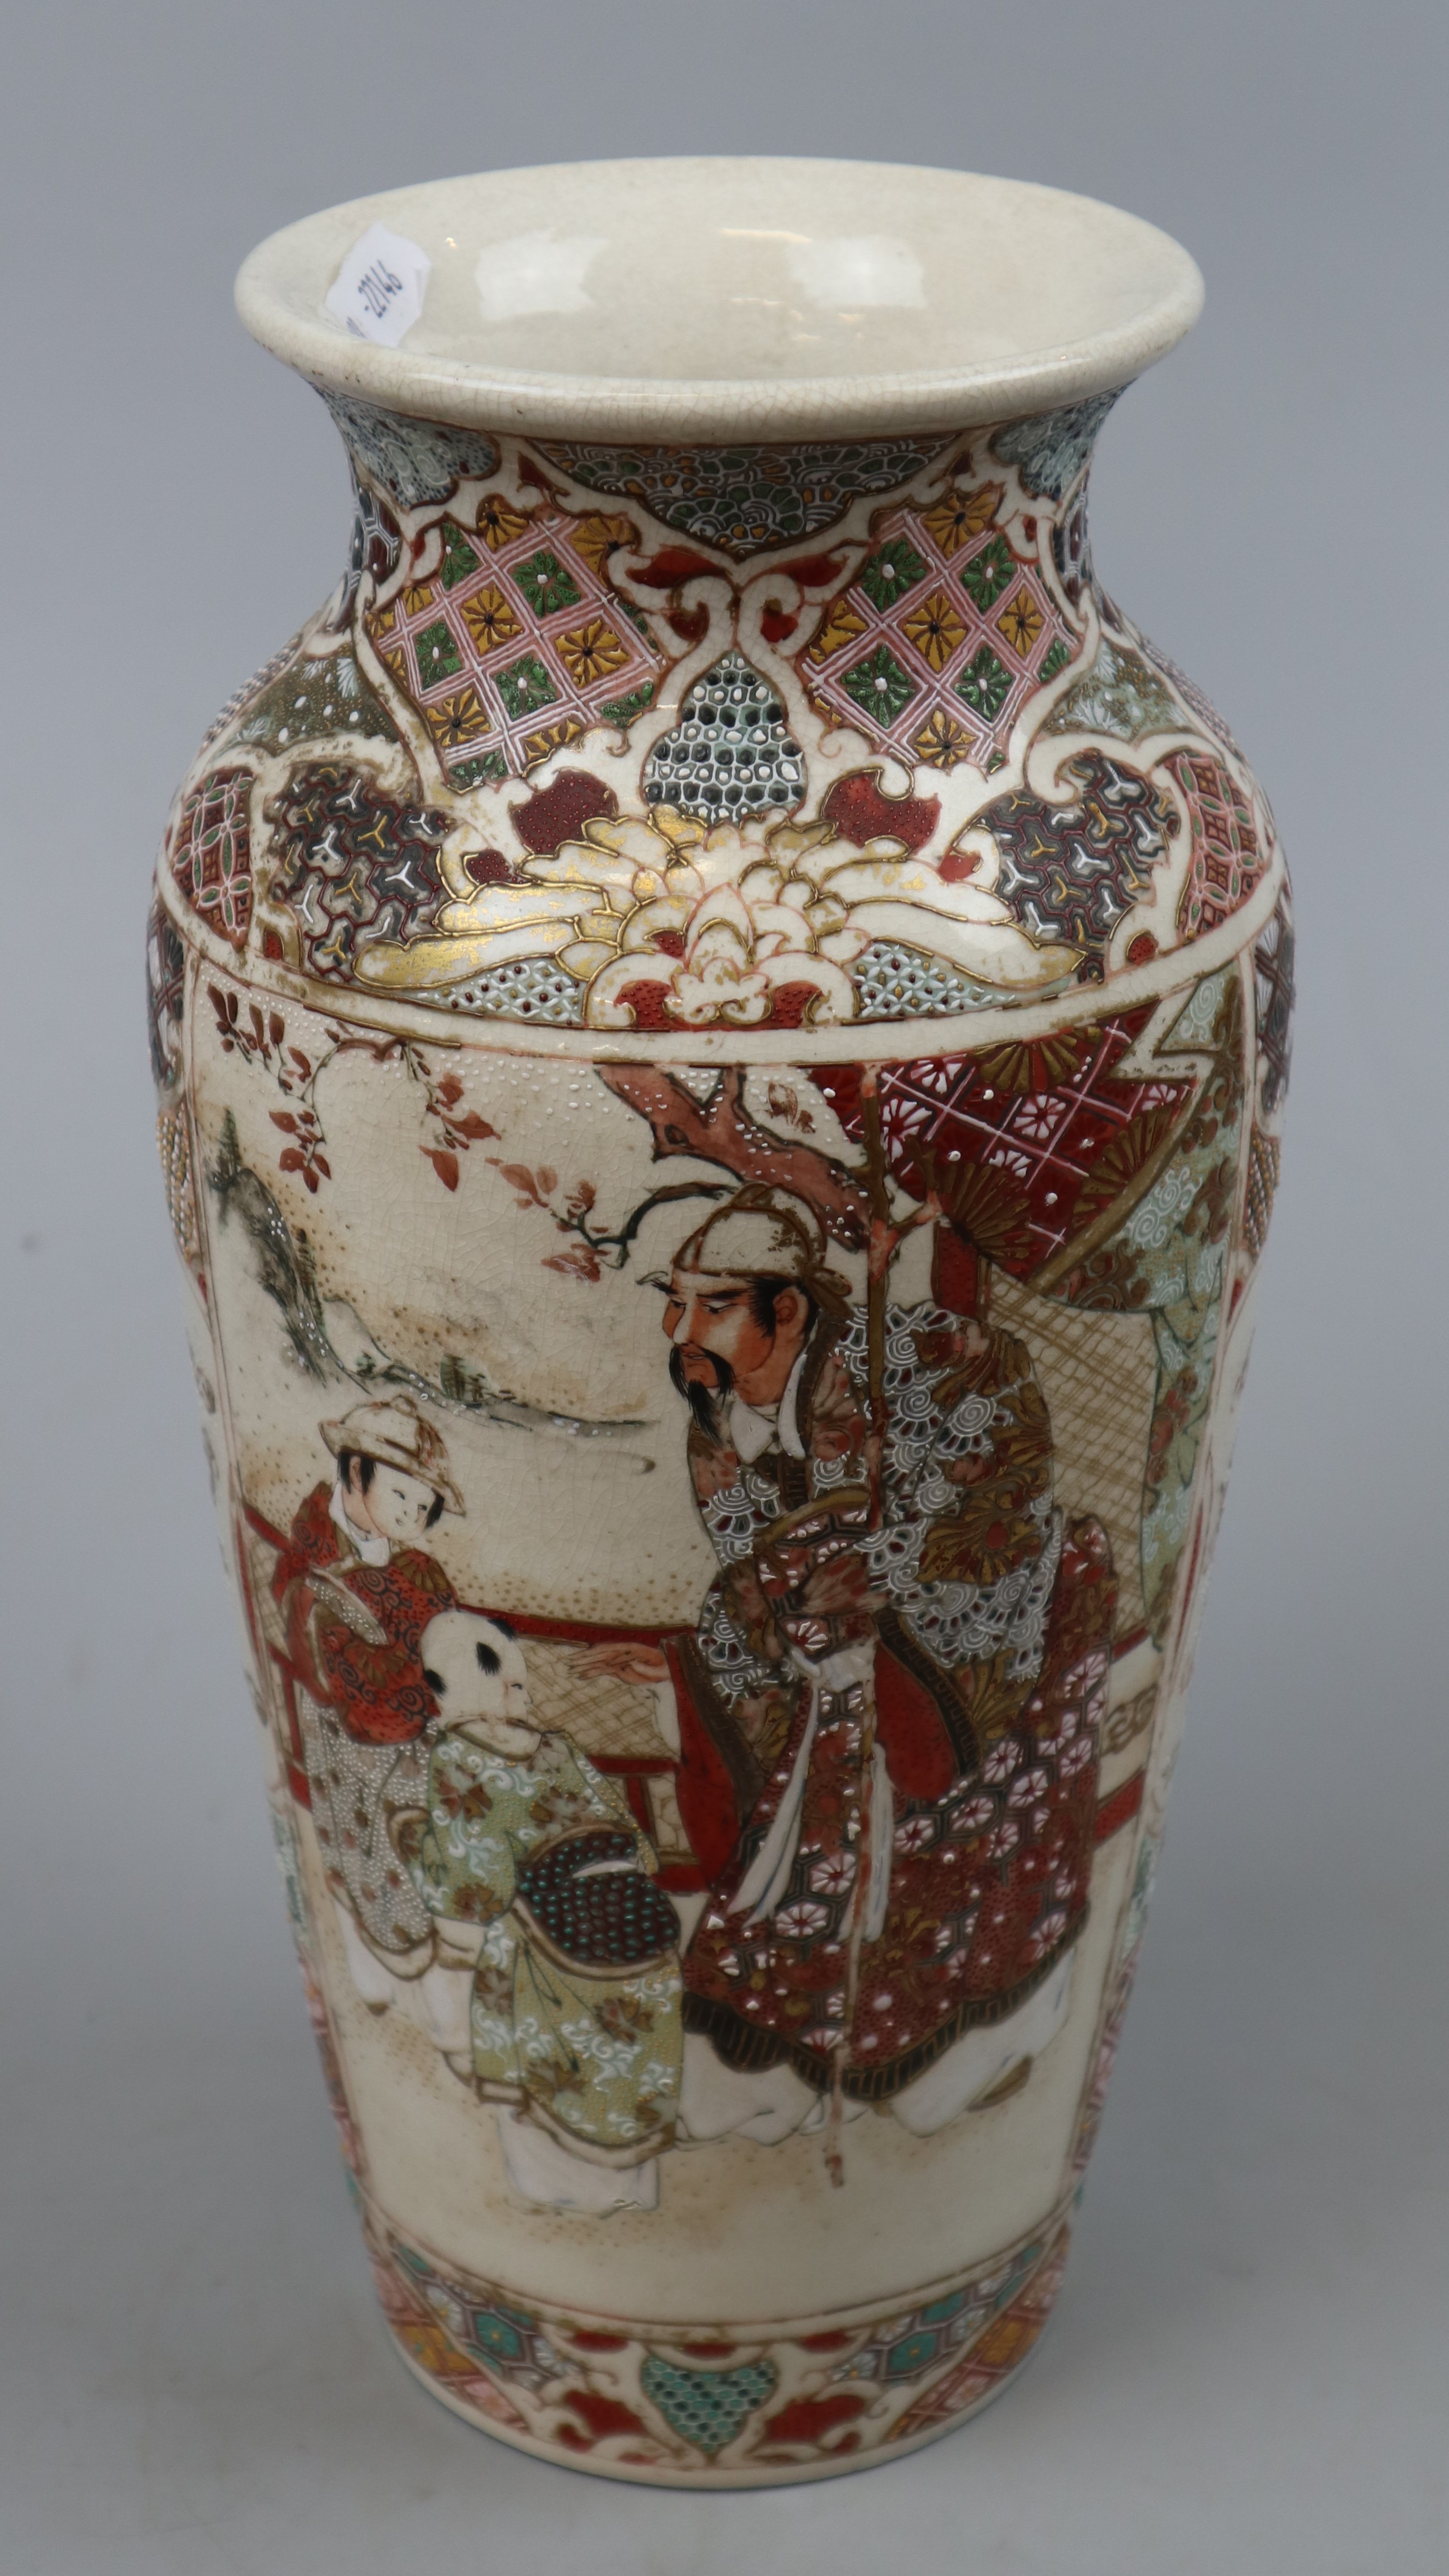 Japanese satsuma earthenware vase - Approx height: 31cm - Image 3 of 3